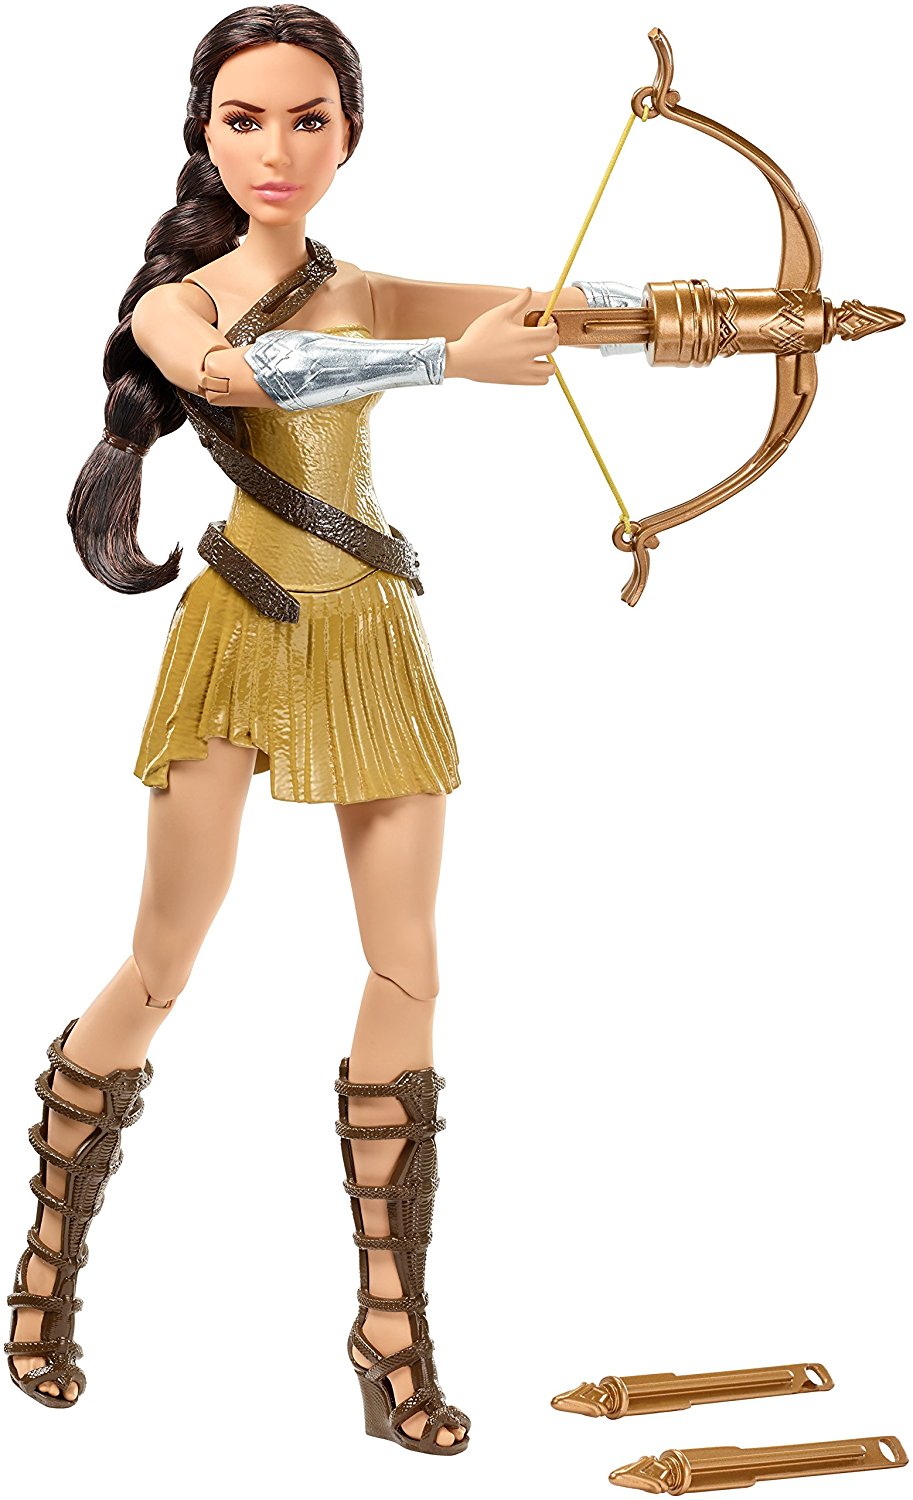 Wonder Woman Bow and Arrow Toy